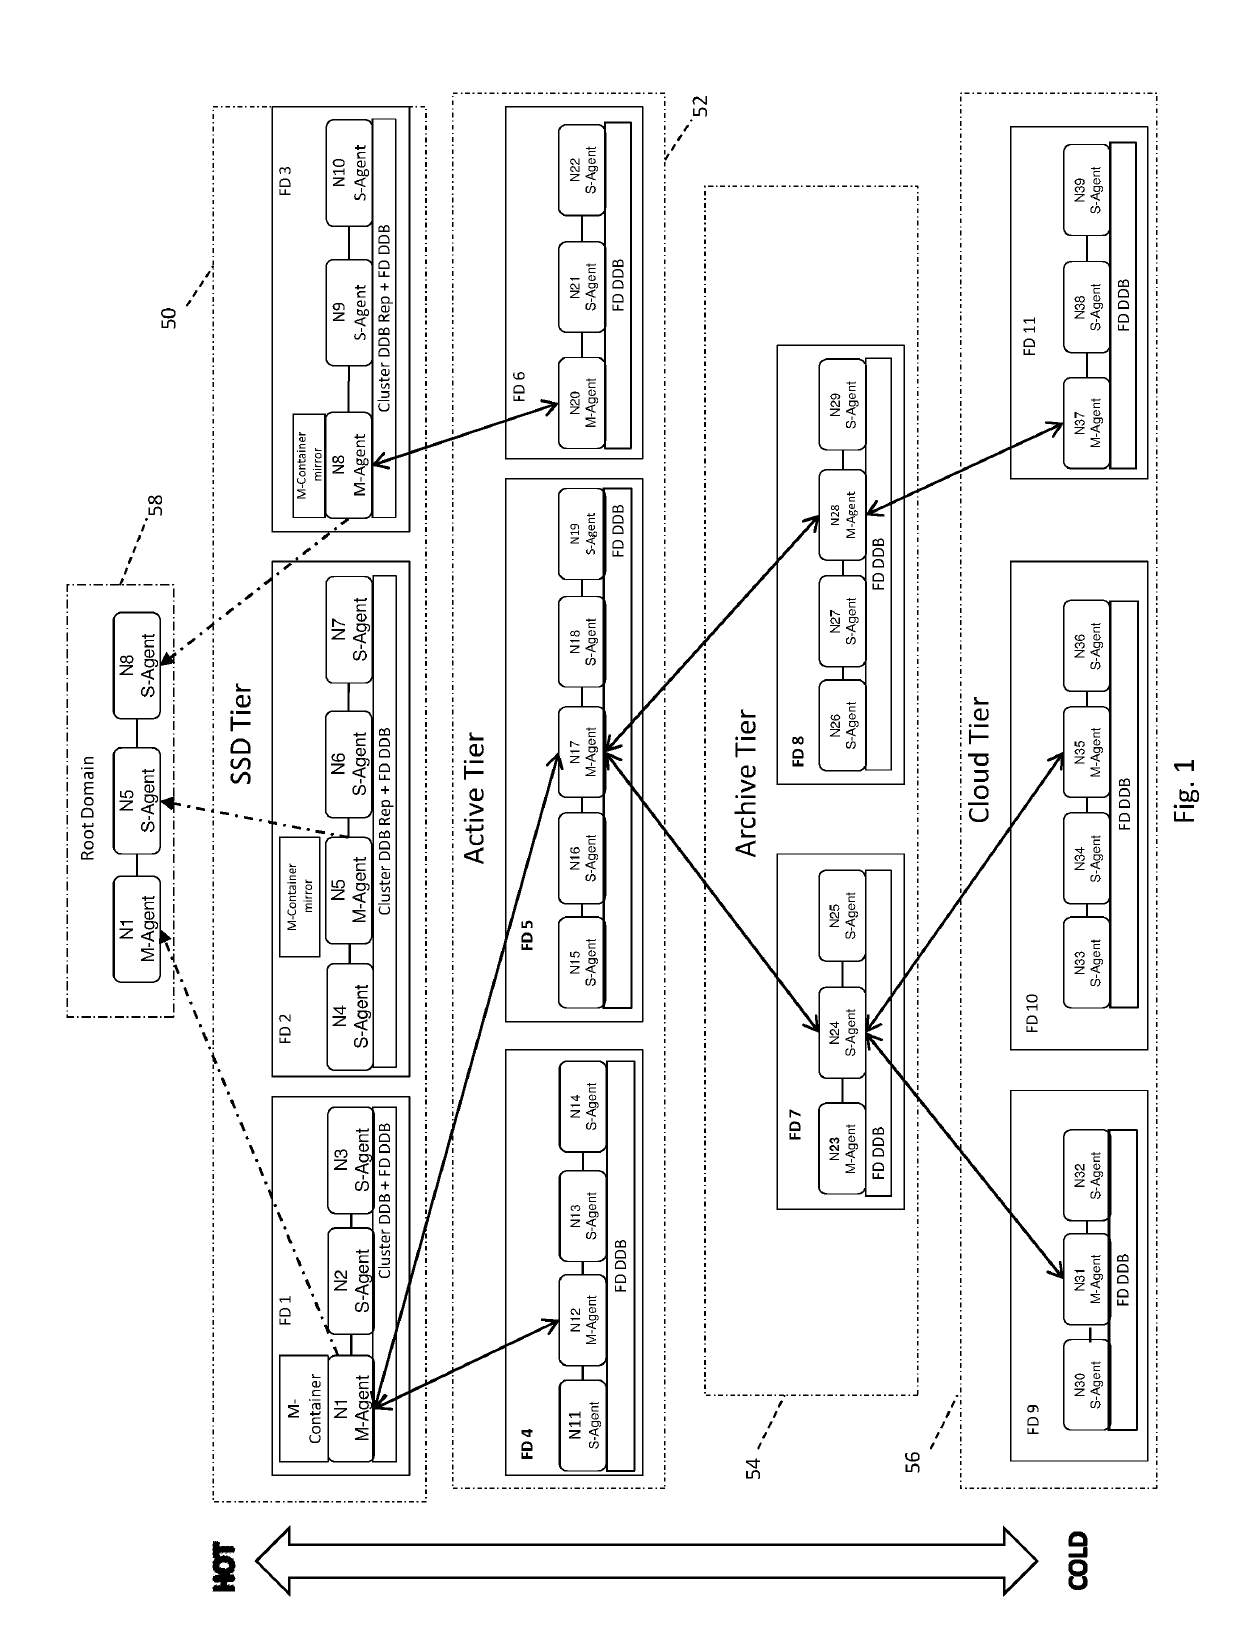 Data Protection Cluster System Supporting Multiple Data Tiers